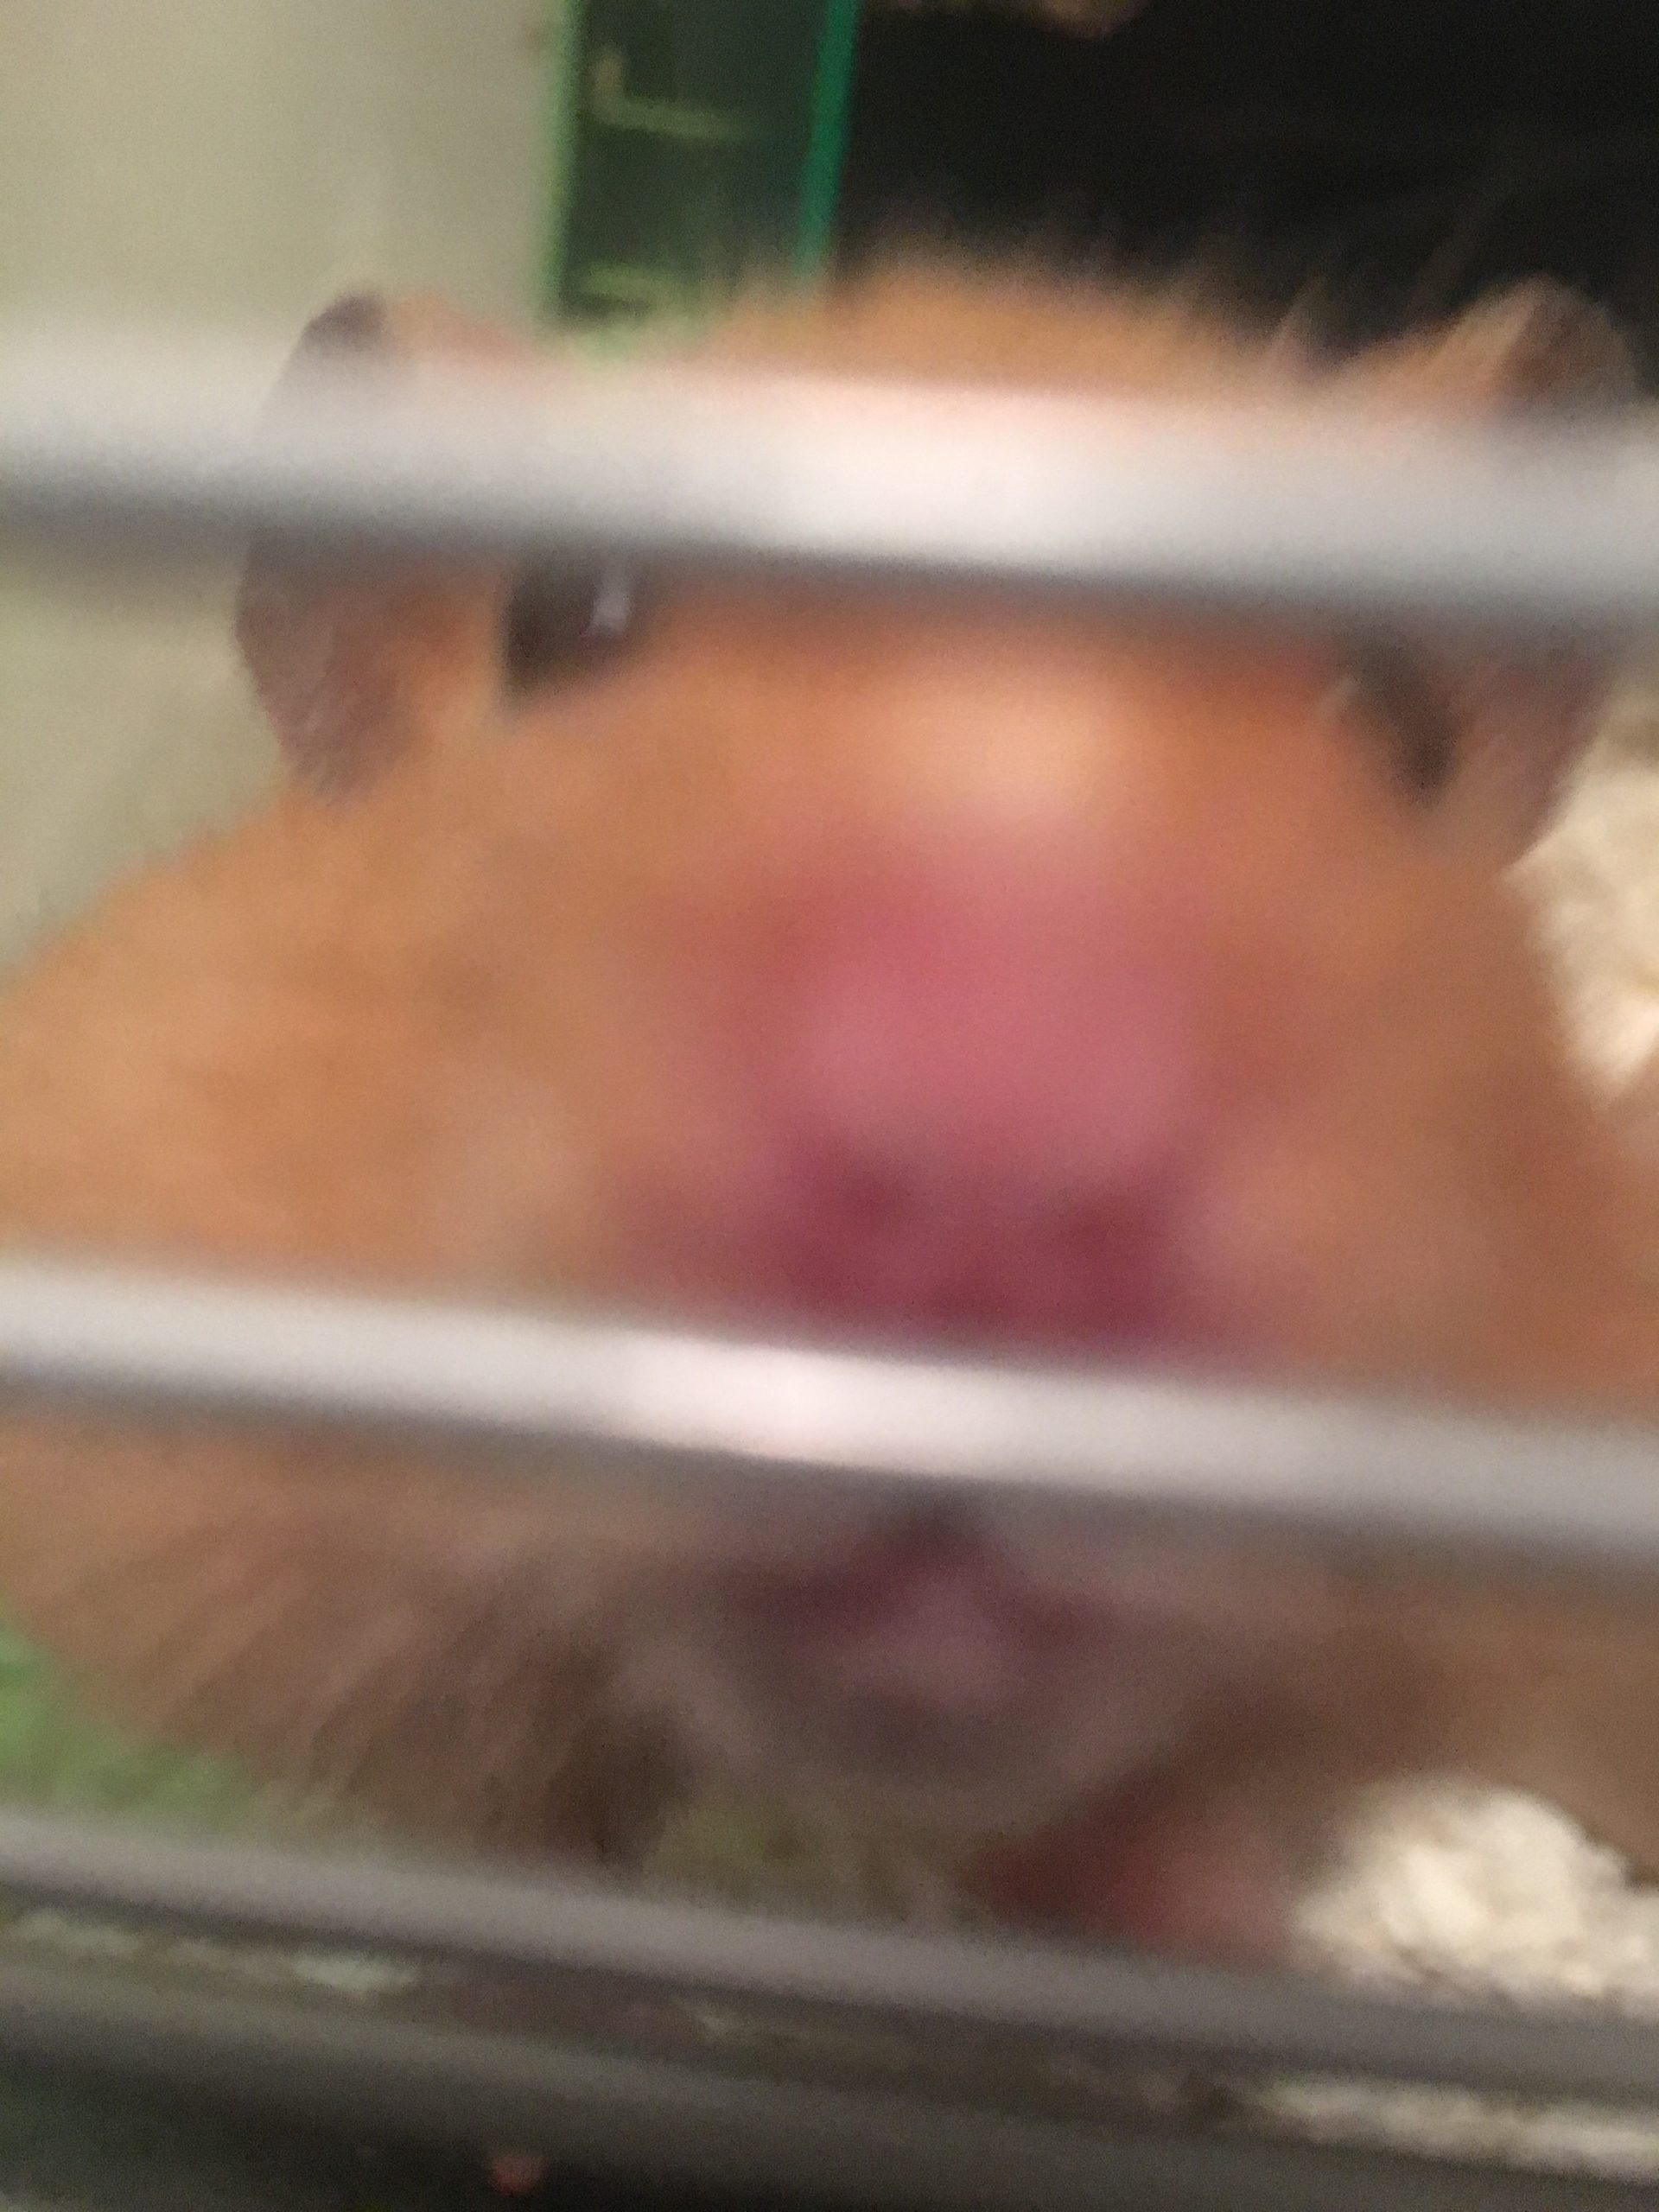 Shane the hamster, may he rest in peace